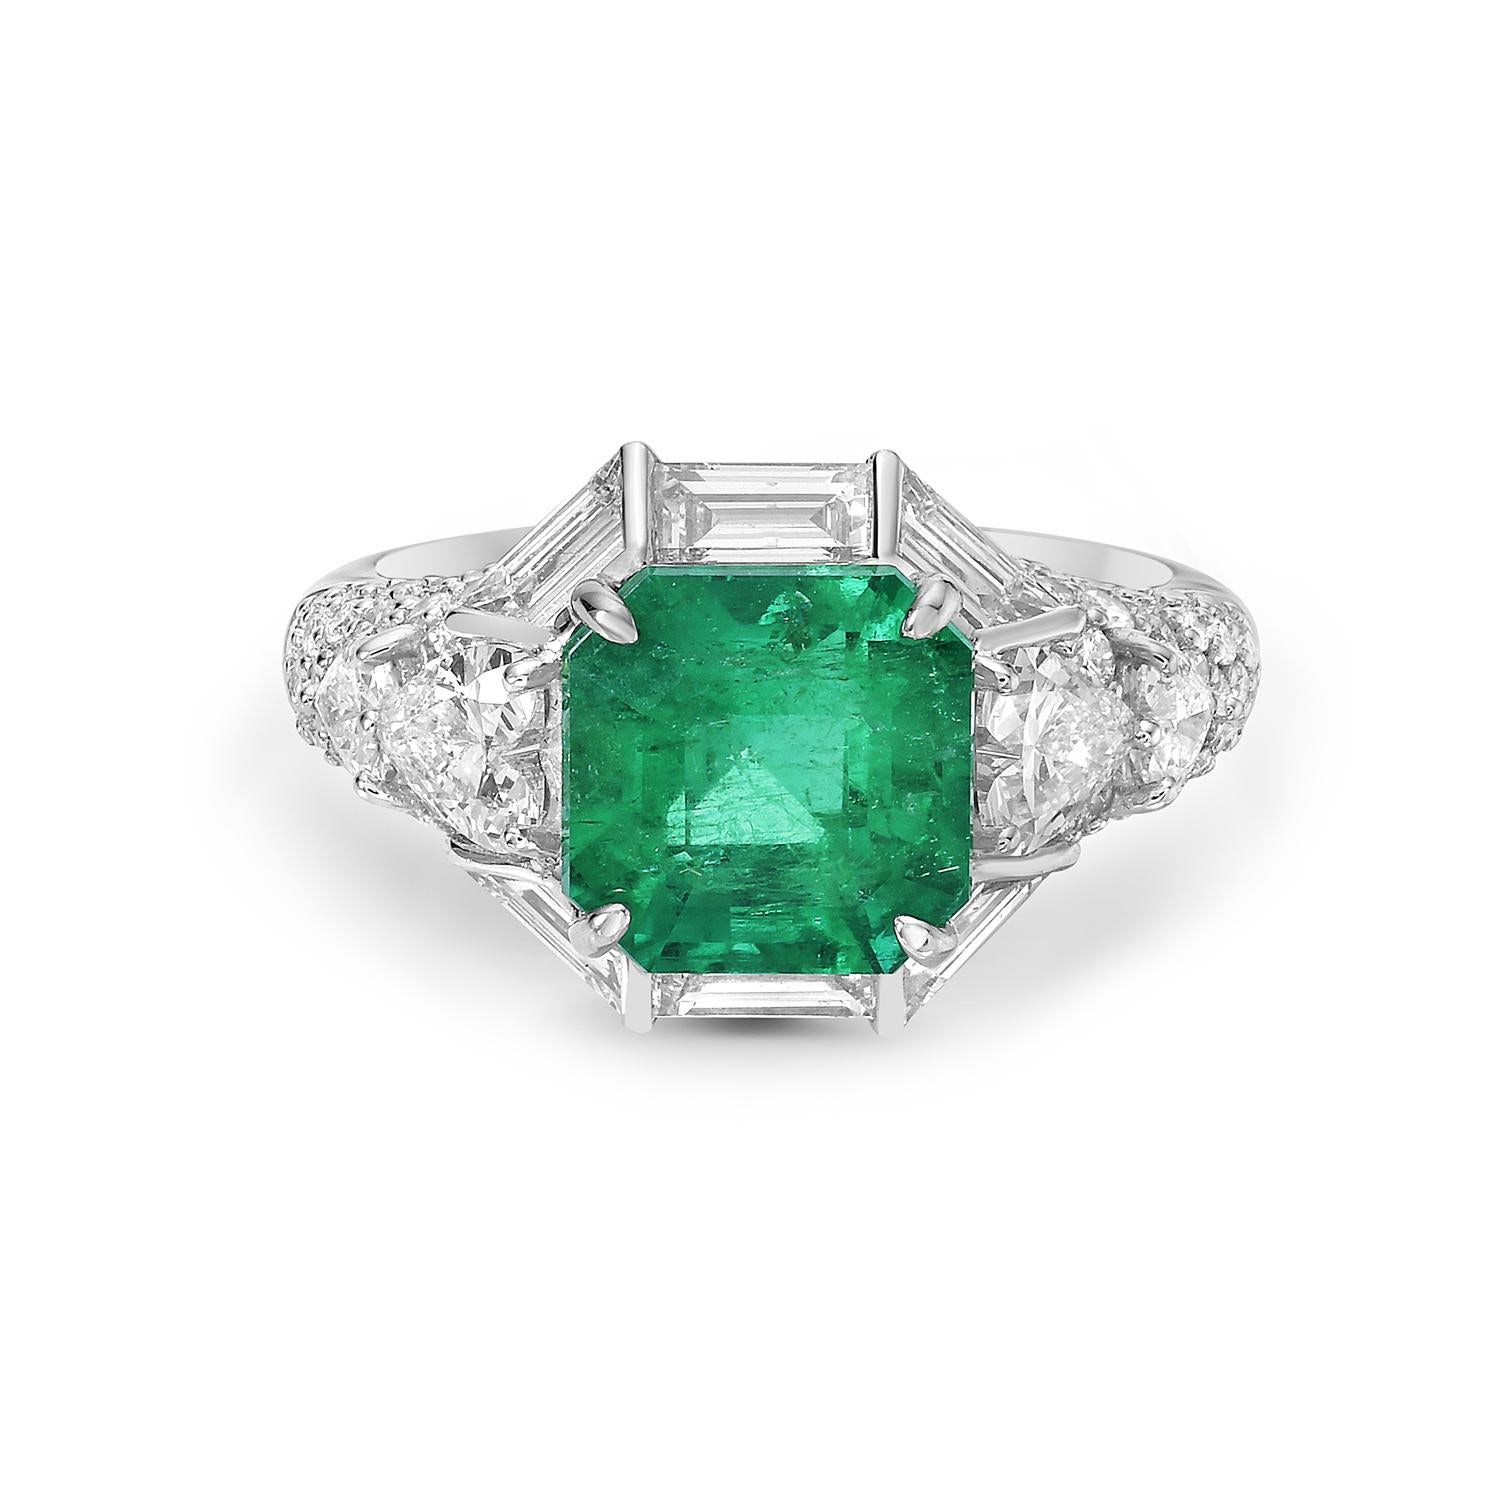 Mixed Cut 3.23 ct Center Stone Emerald Cocktail Ring With Diamonds Made In 18k White Gold For Sale